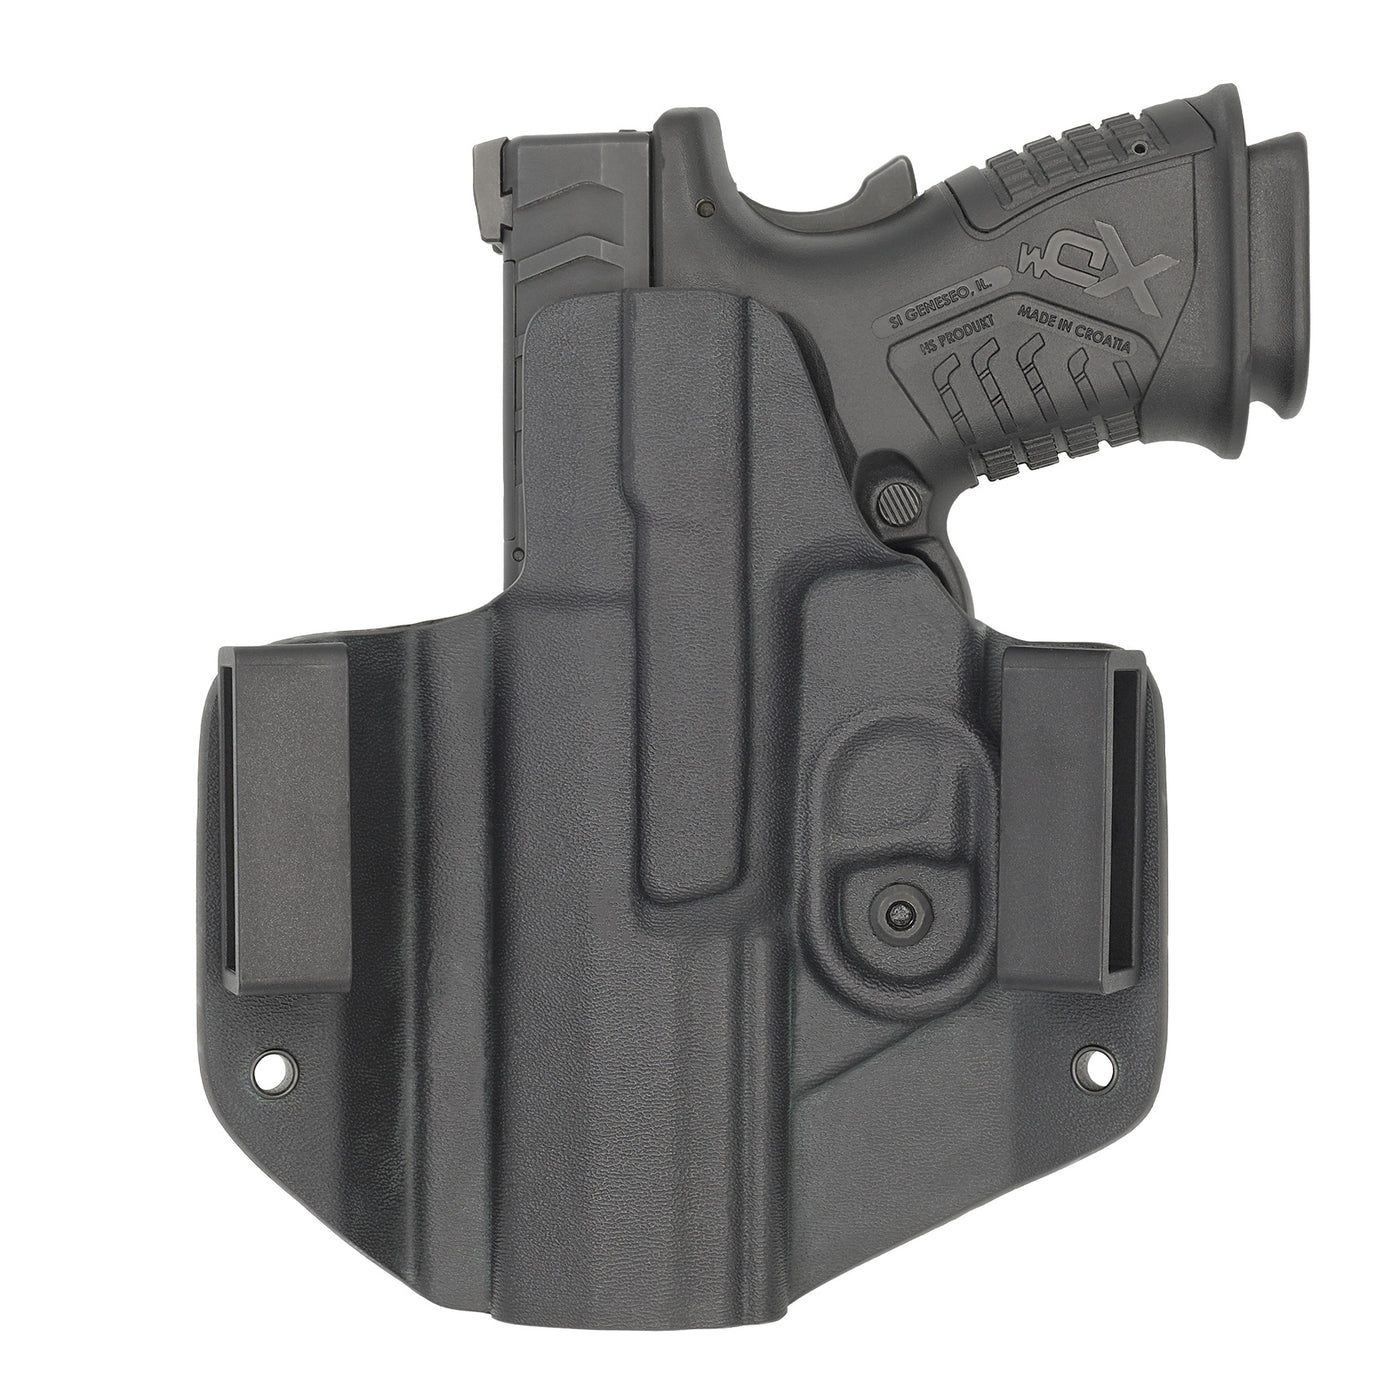 C&G Holsters quickship OWB Covert Springfield XD-M Elite 4.5" OSP in holstered position back view